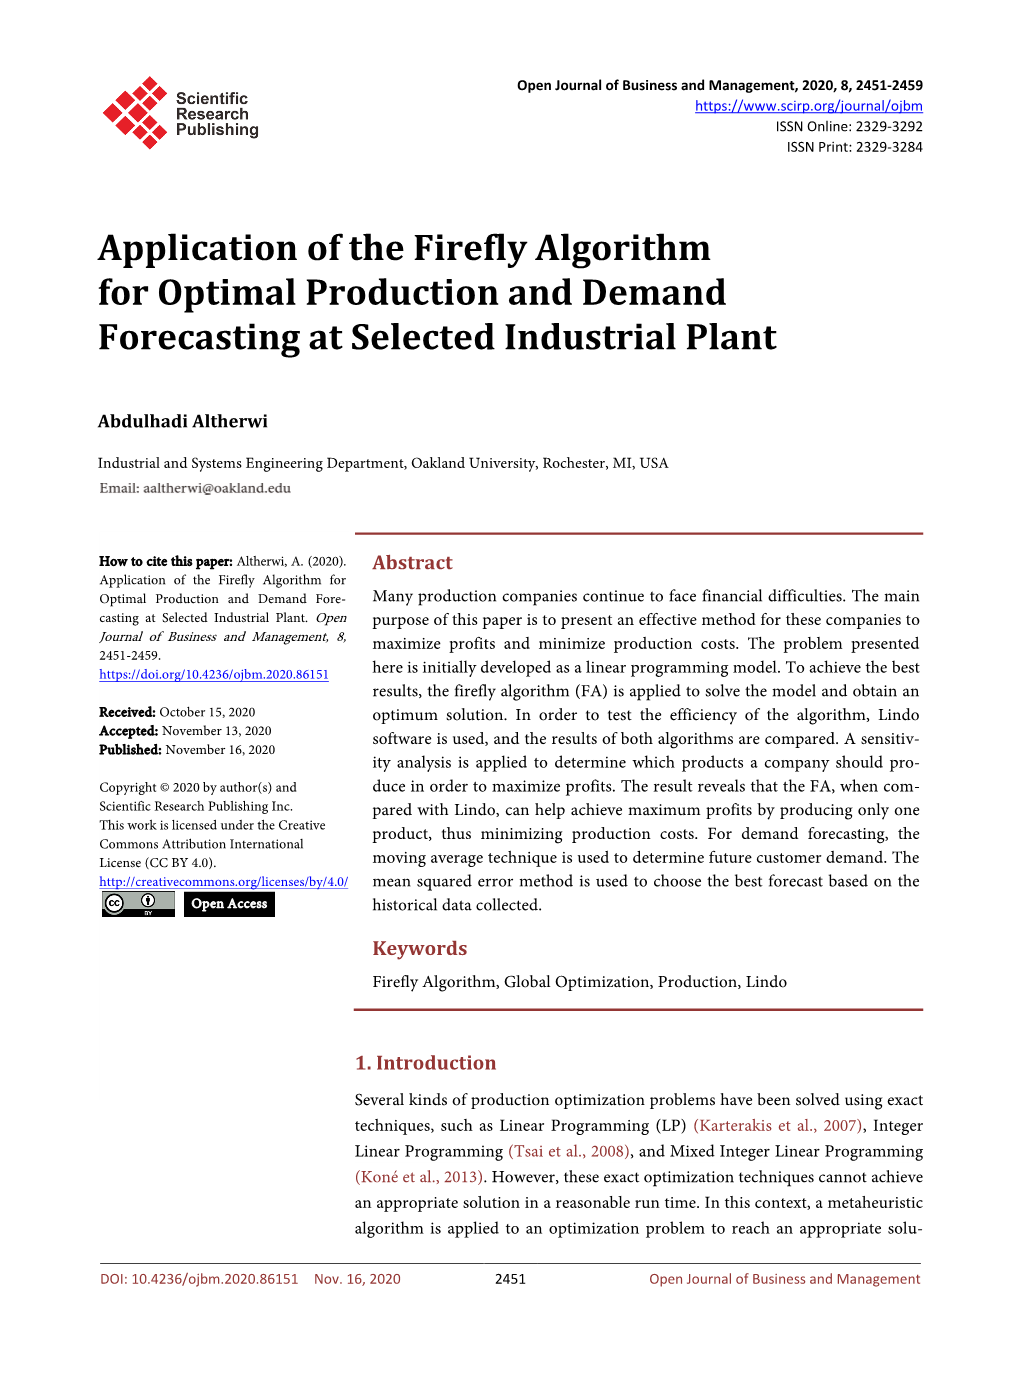 Application of the Firefly Algorithm for Optimal Production and Demand Forecasting at Selected Industrial Plant